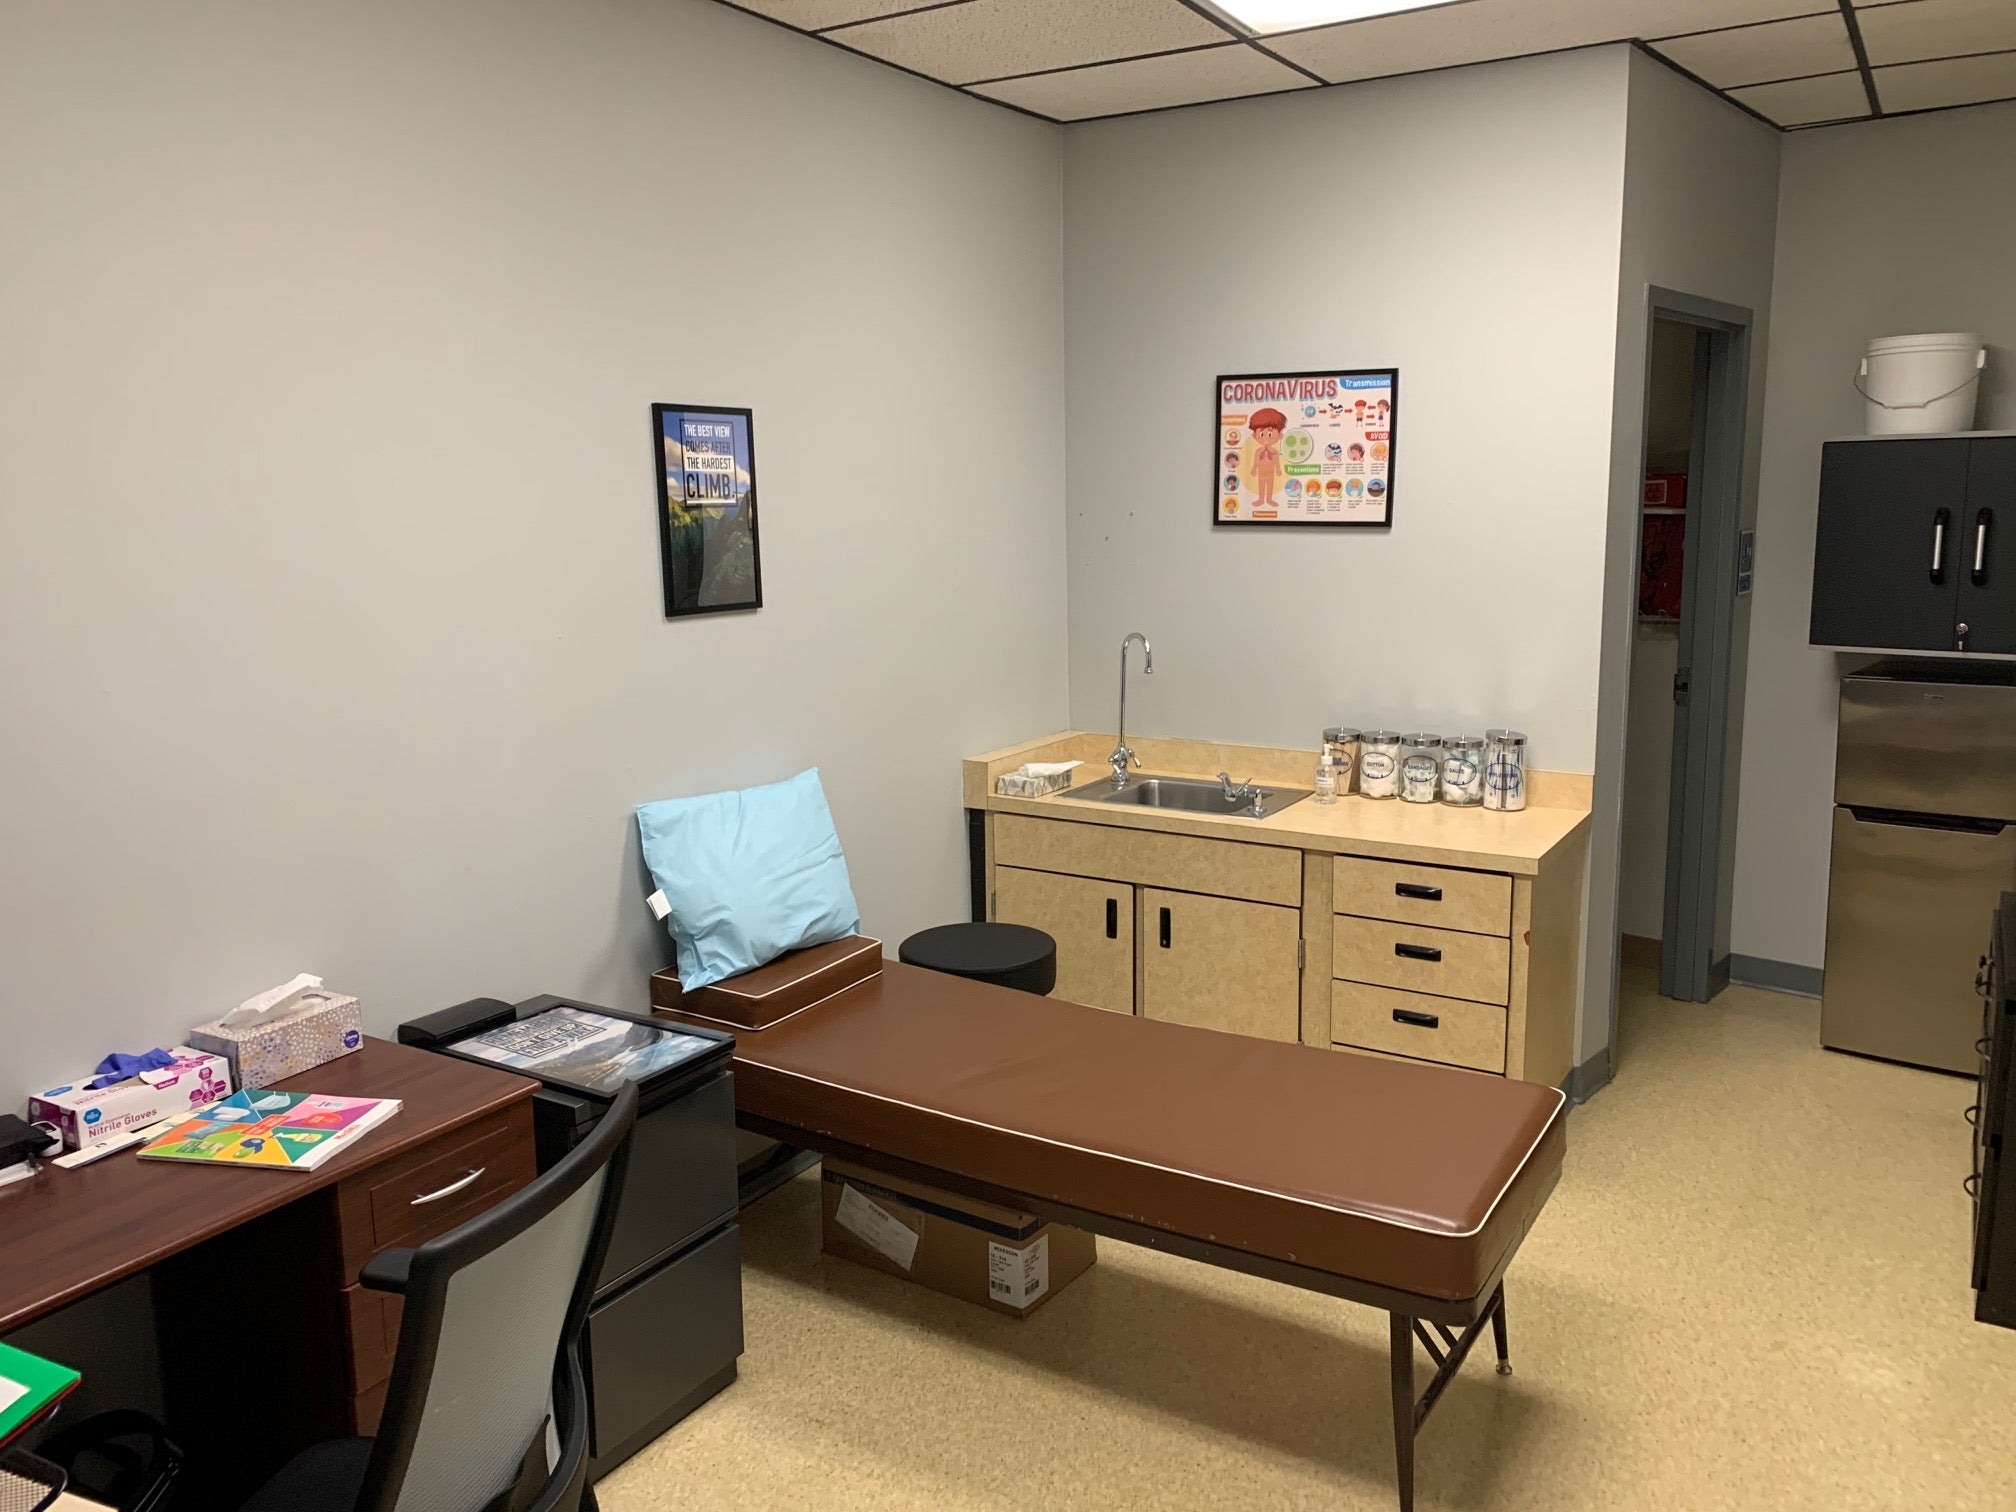 An exam room at the Marsing Elementary School clinic. The room include an exam bed, a desk and chair, and a sink and counter area with jars of tongue depressors, cotton swabs, and disinfectant wipes. 